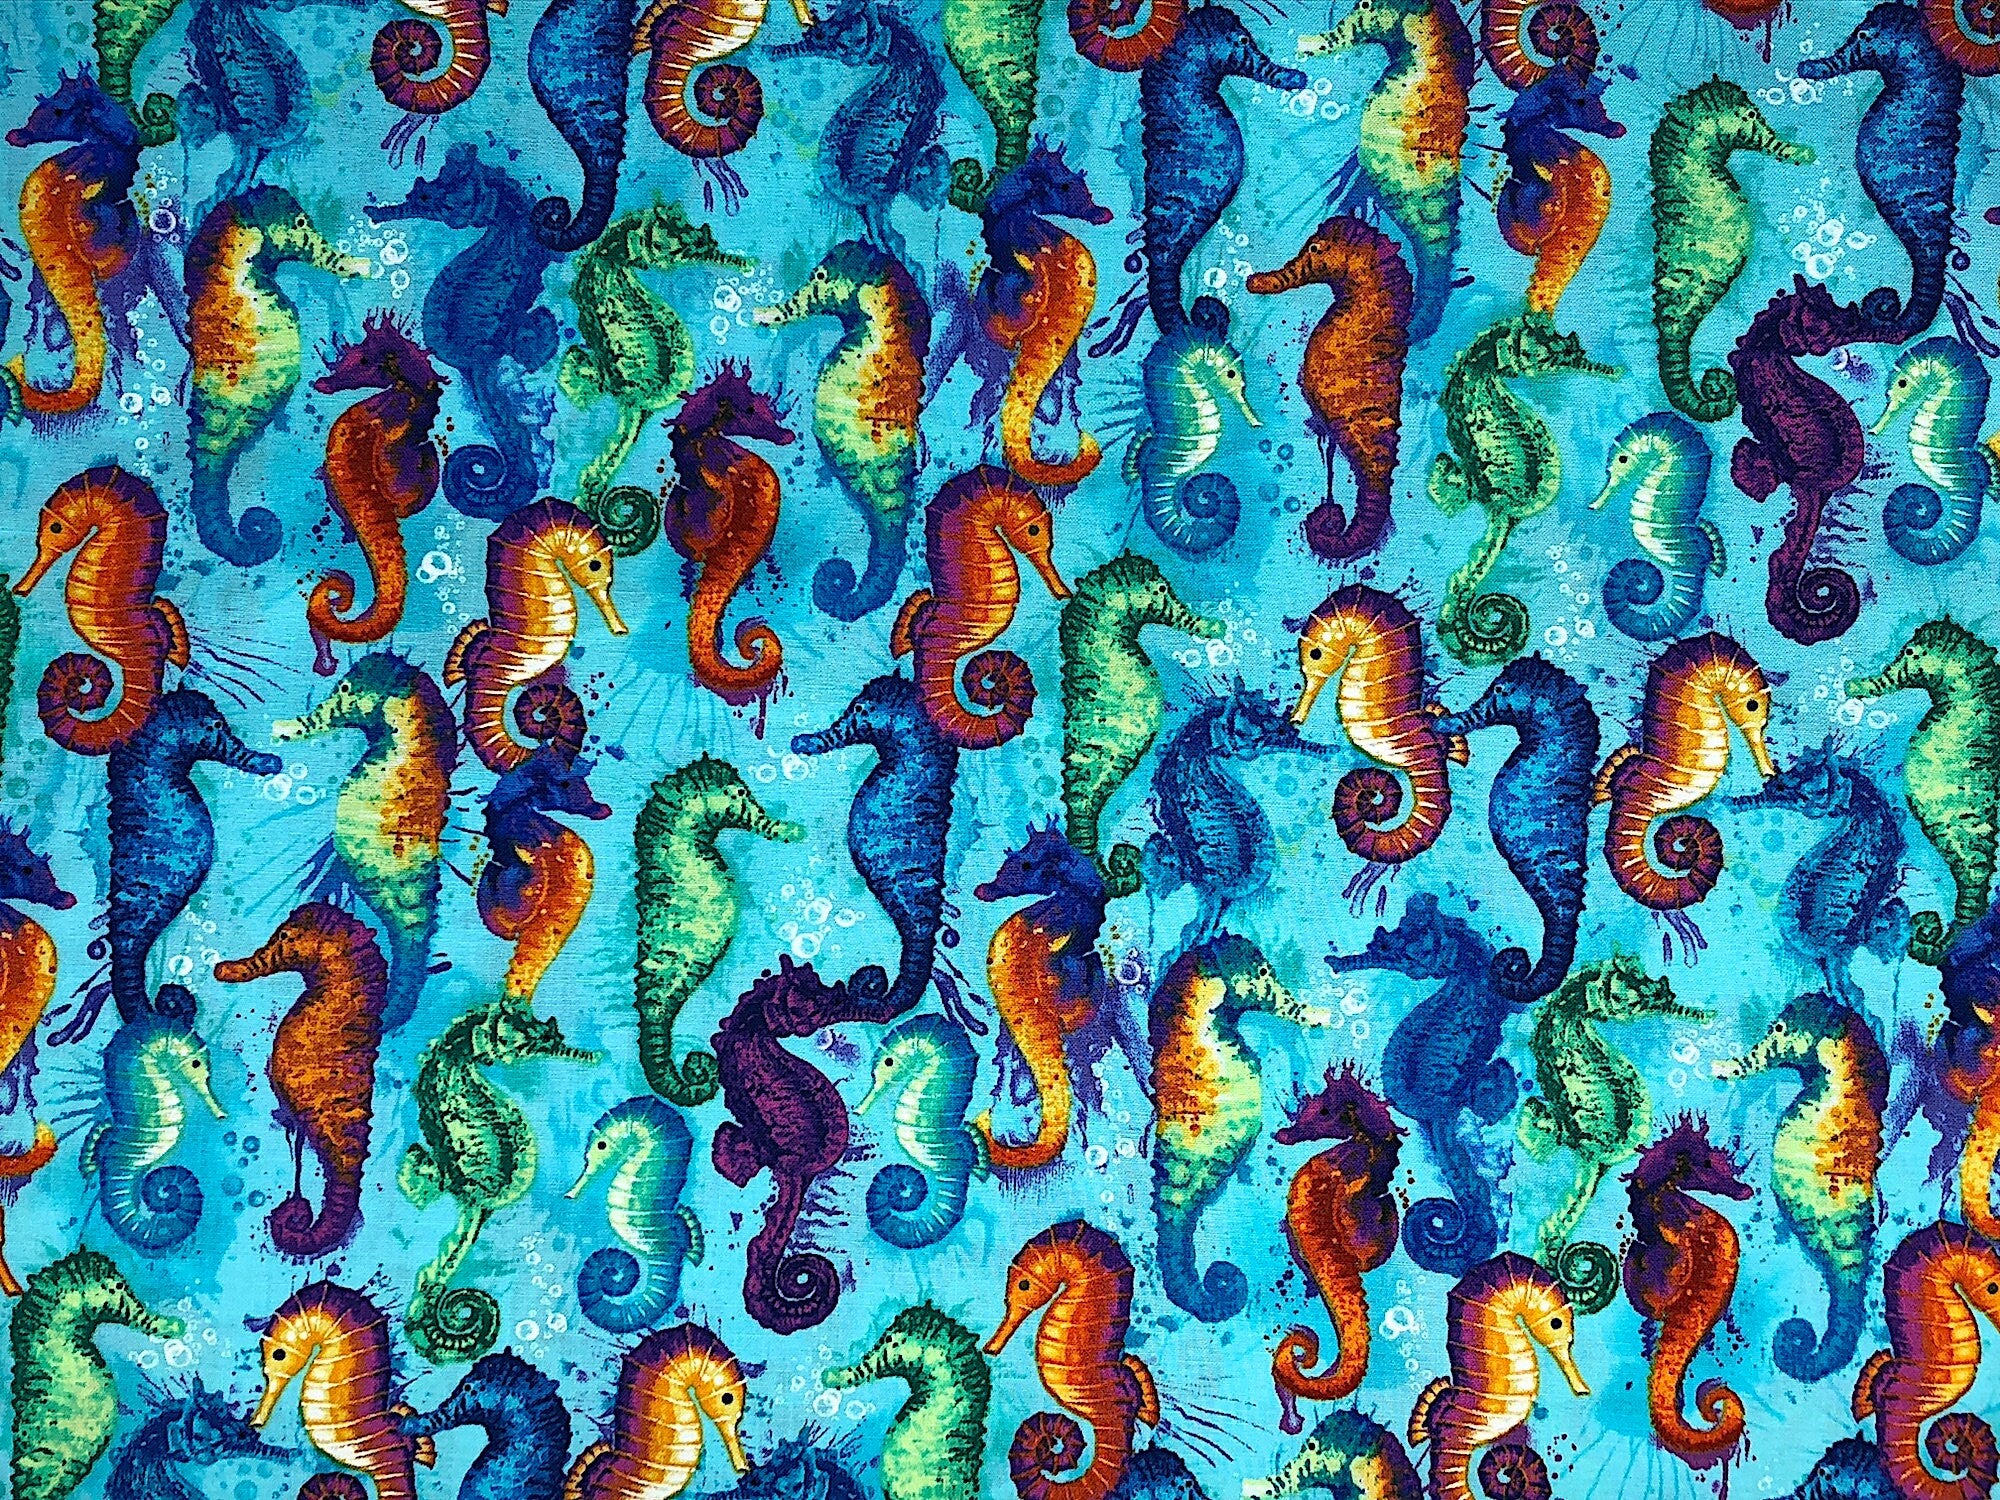 Swimming Seahorses cover this fabric. The seahorses are blue, green, yellow, orange and purple. the background is a pretty turquoise blue